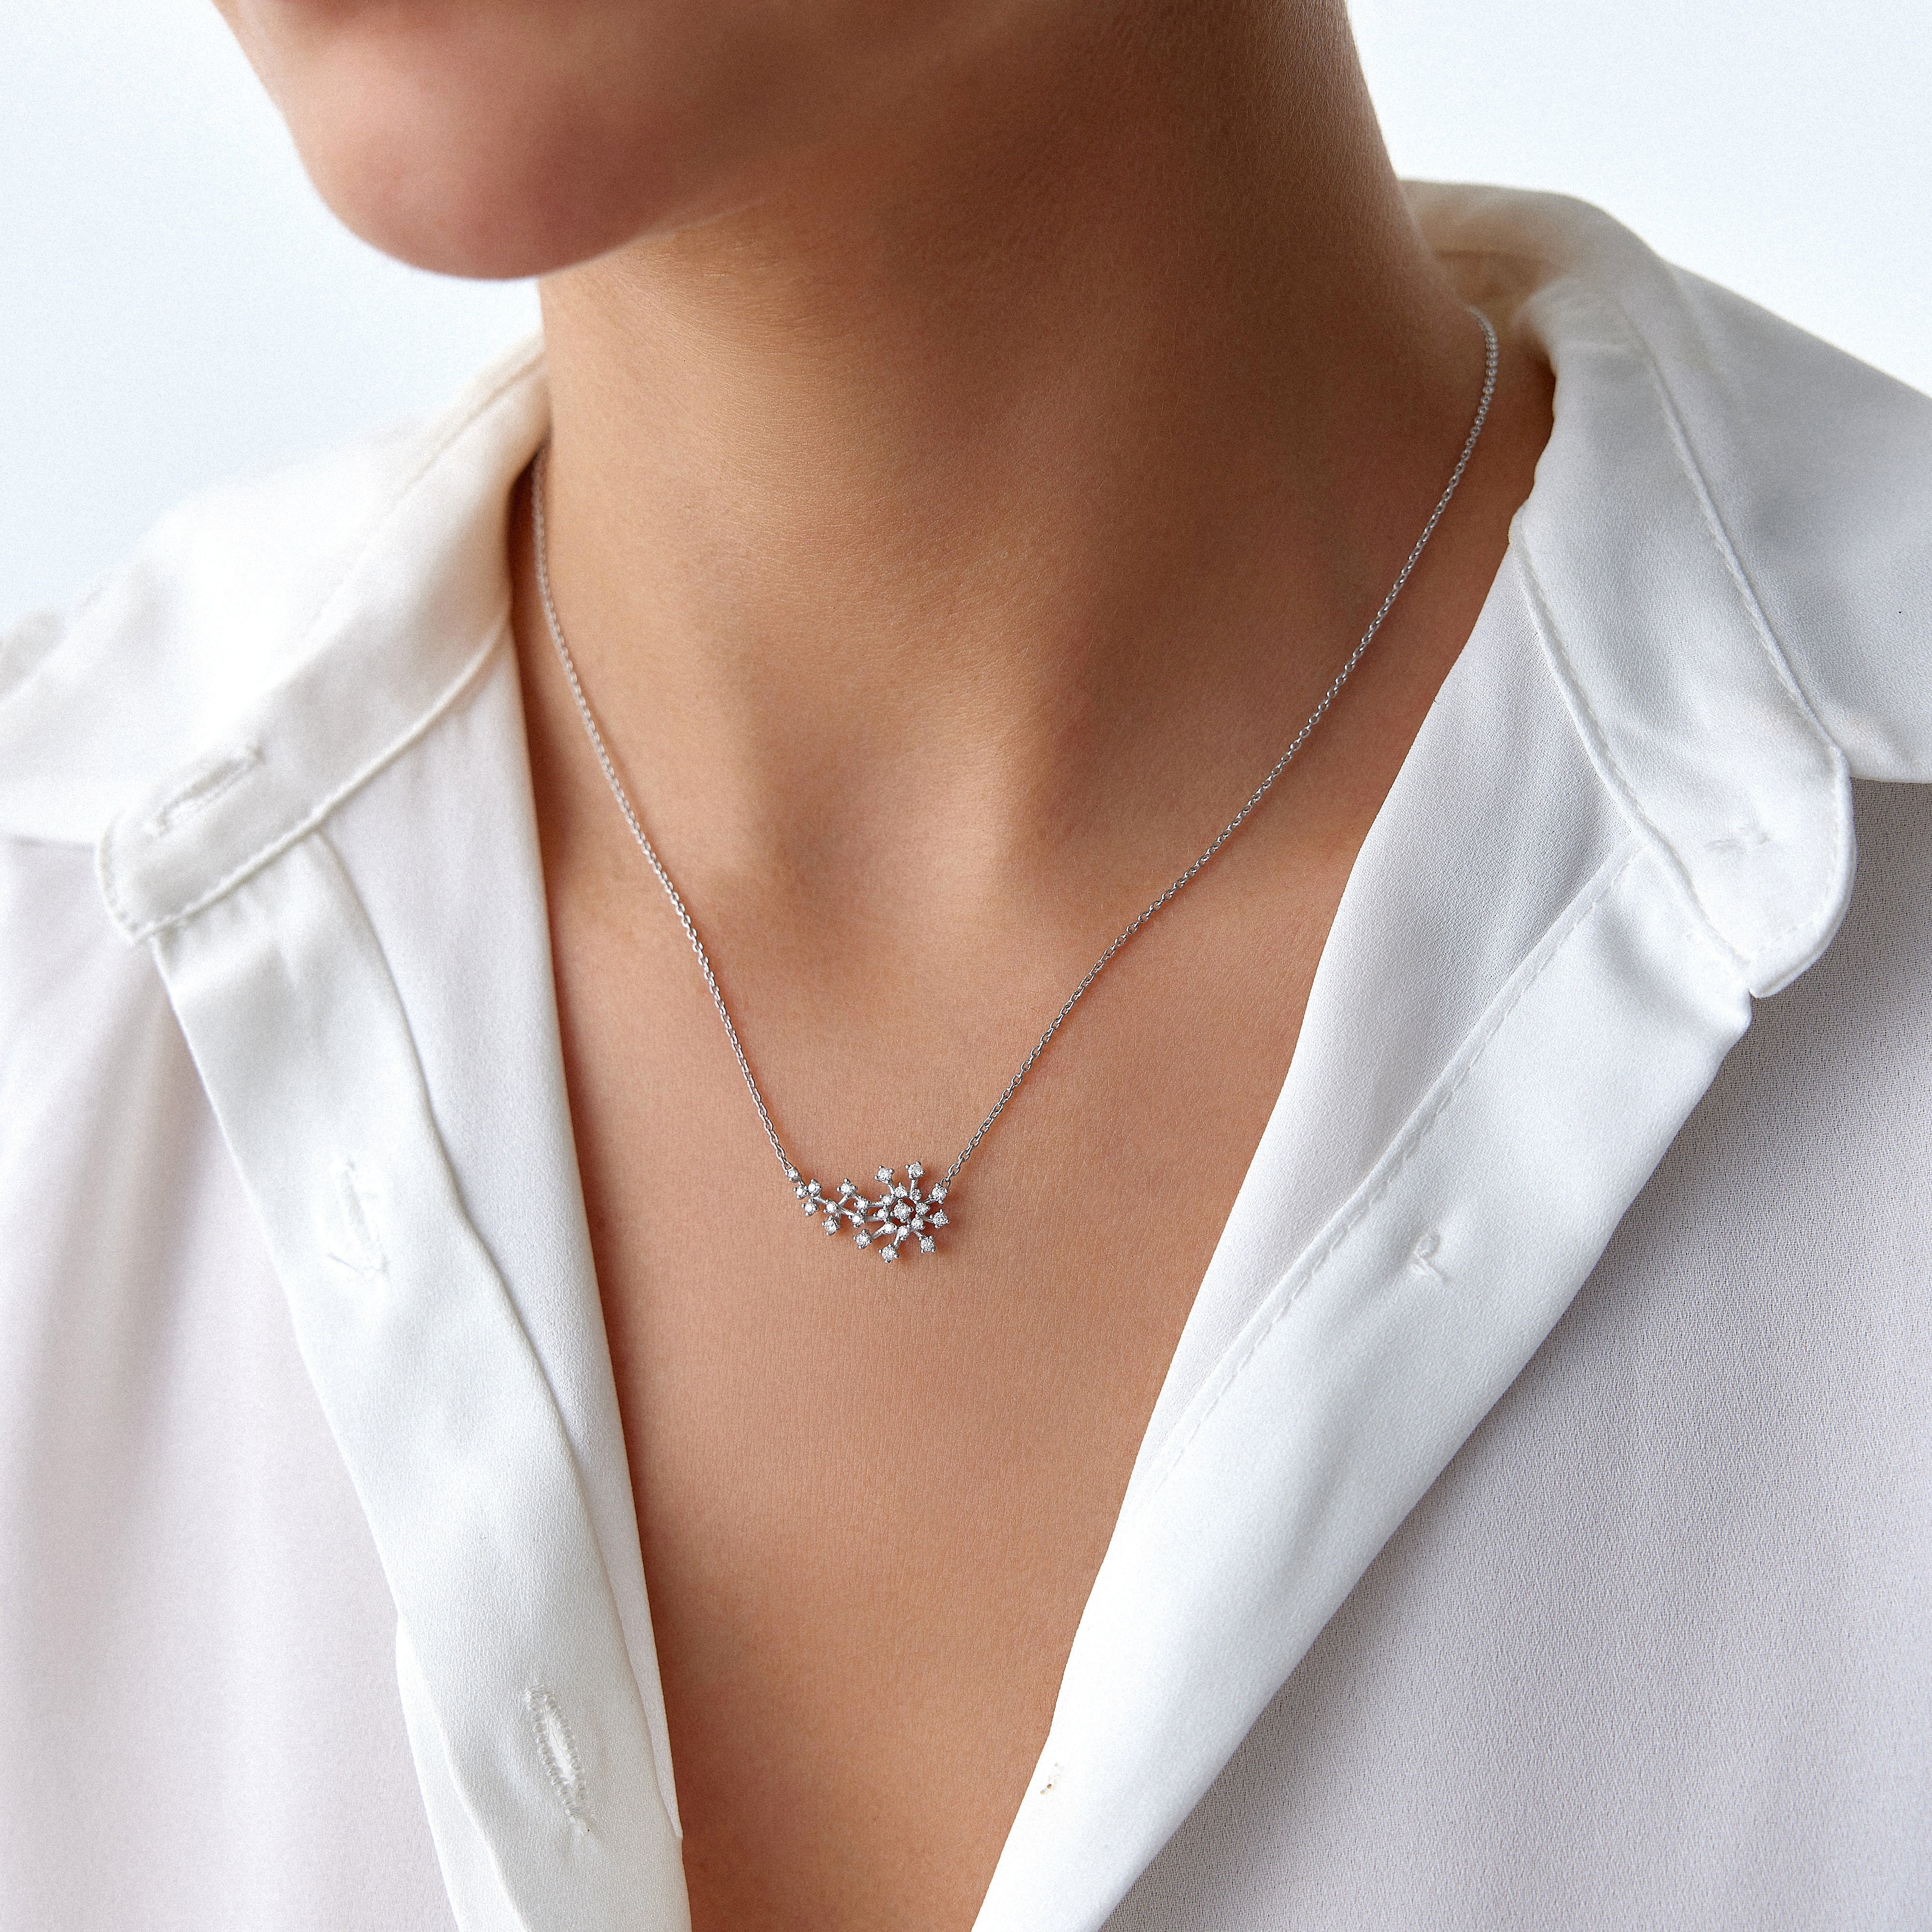 Diamond Comet Necklace Available in 14K and 18K Gold